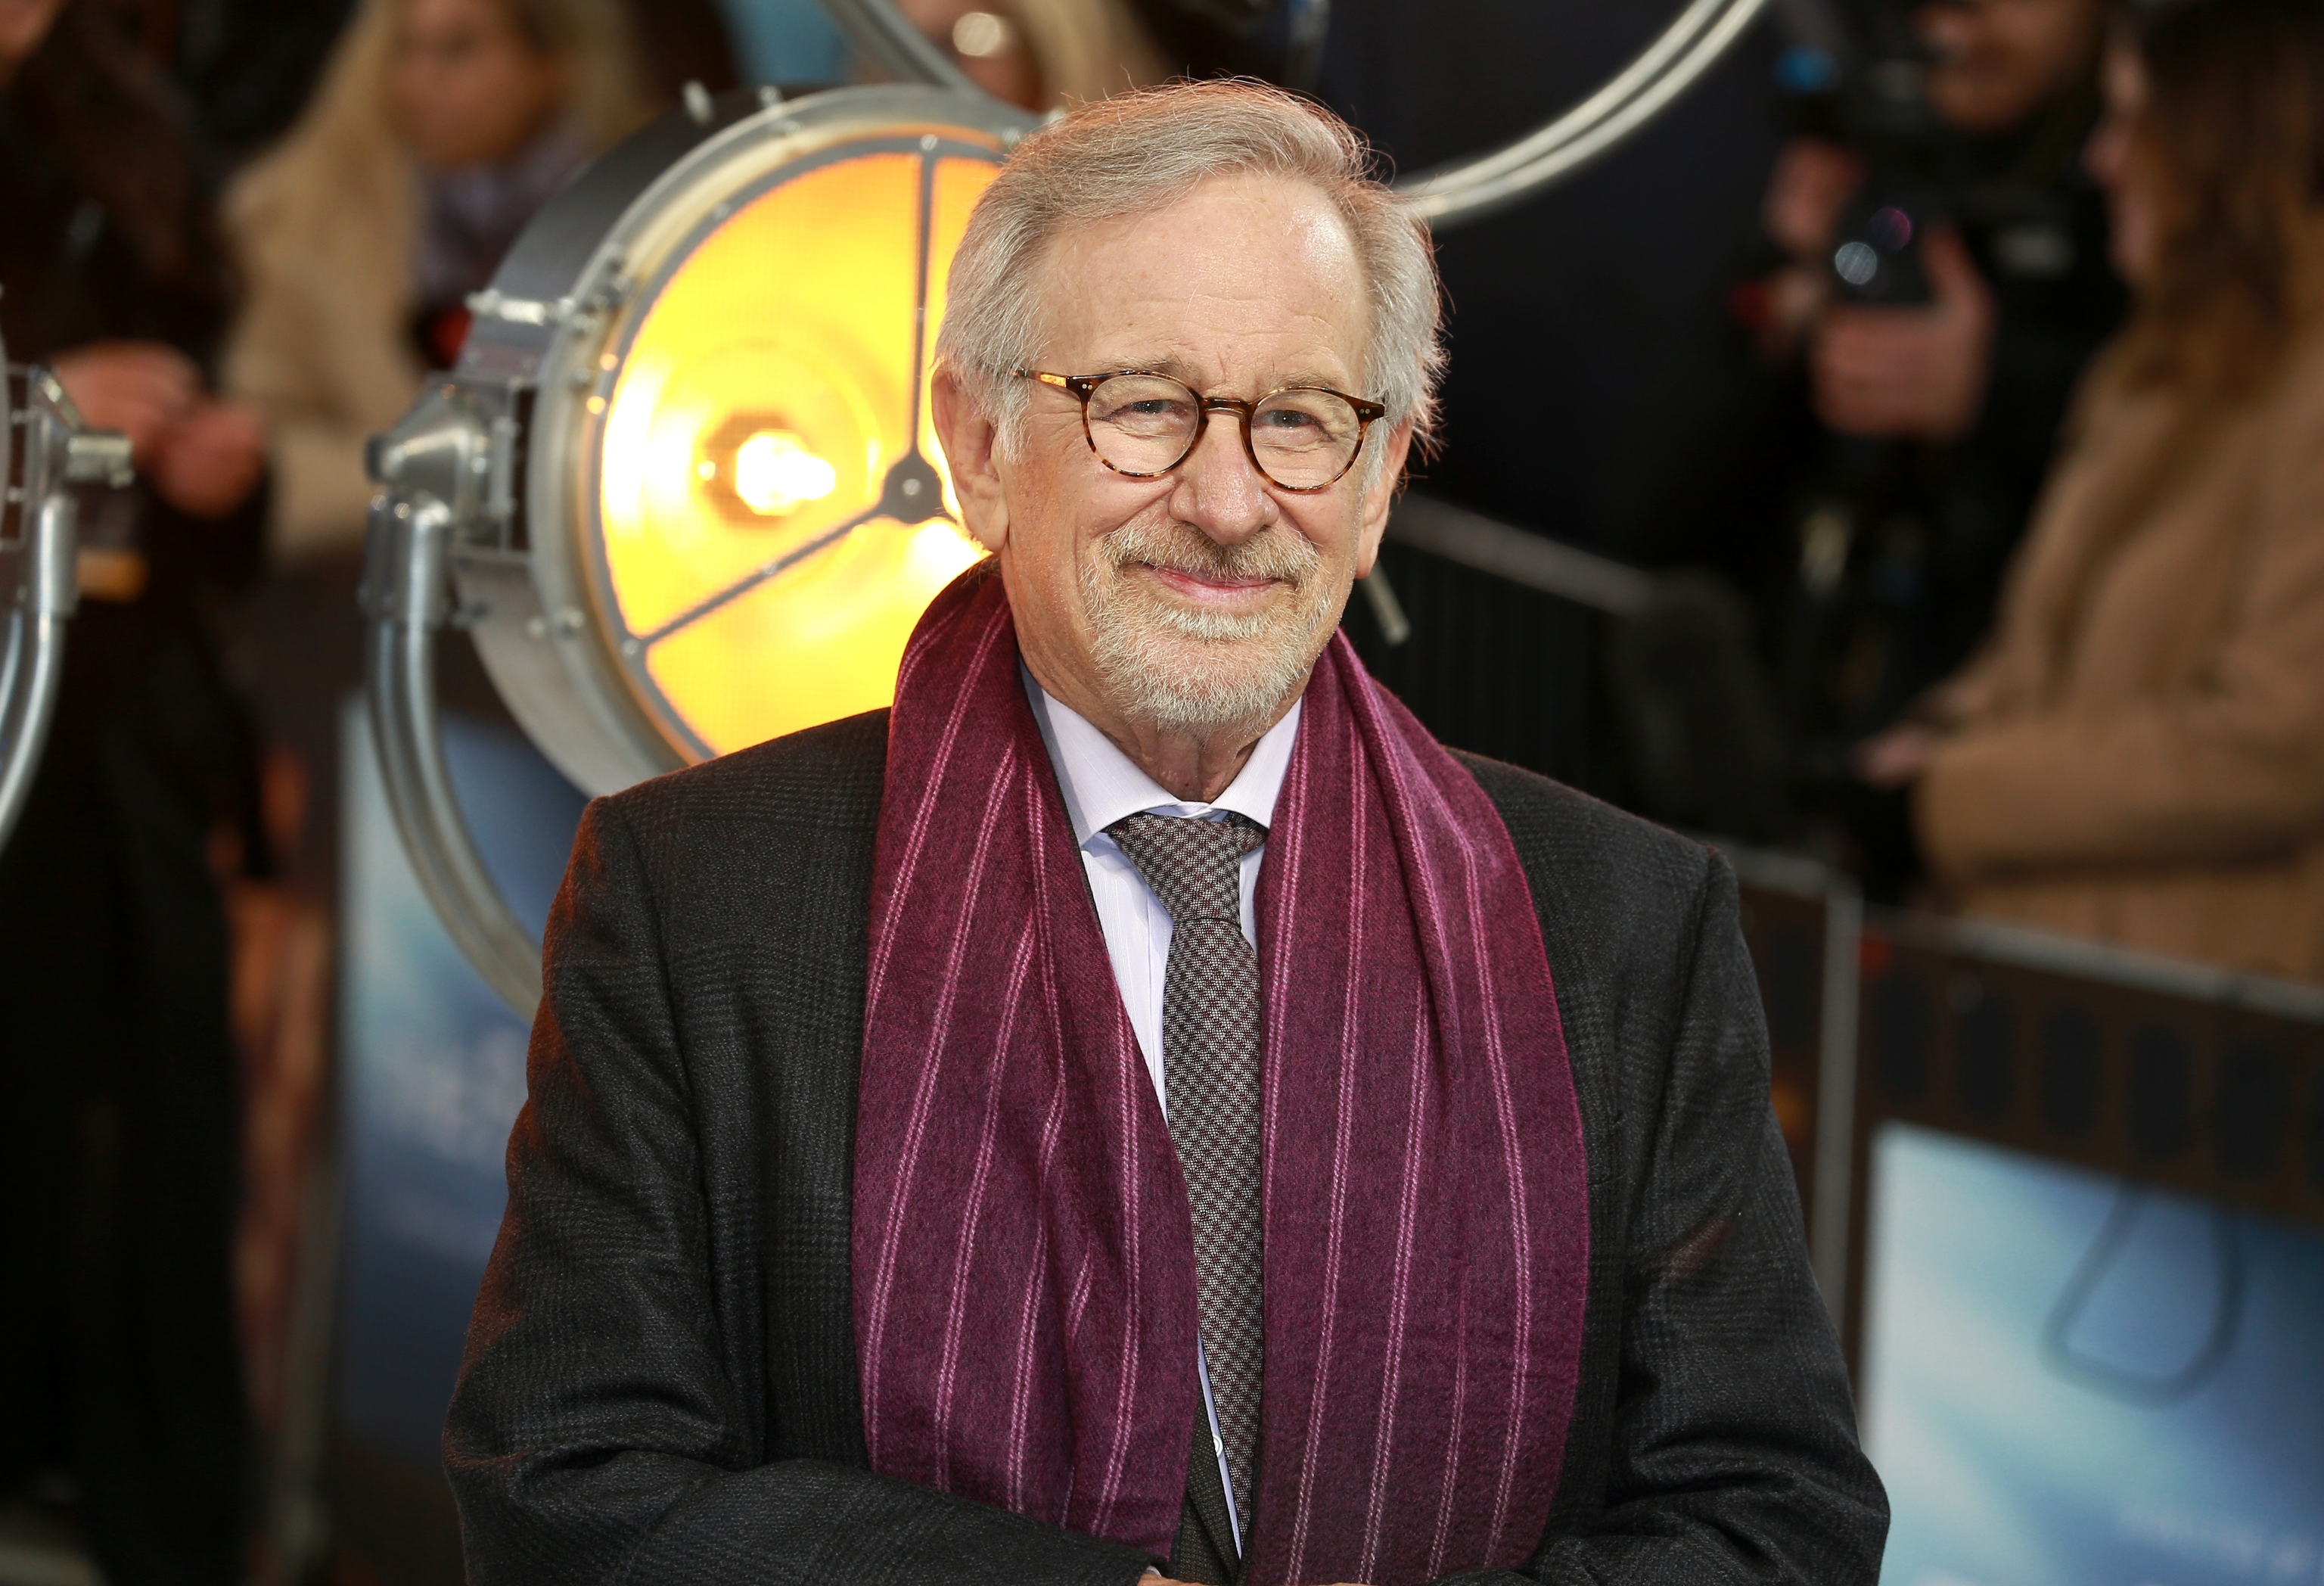 Steven Spielberg at premiere of "The Fabelmans" in 2023